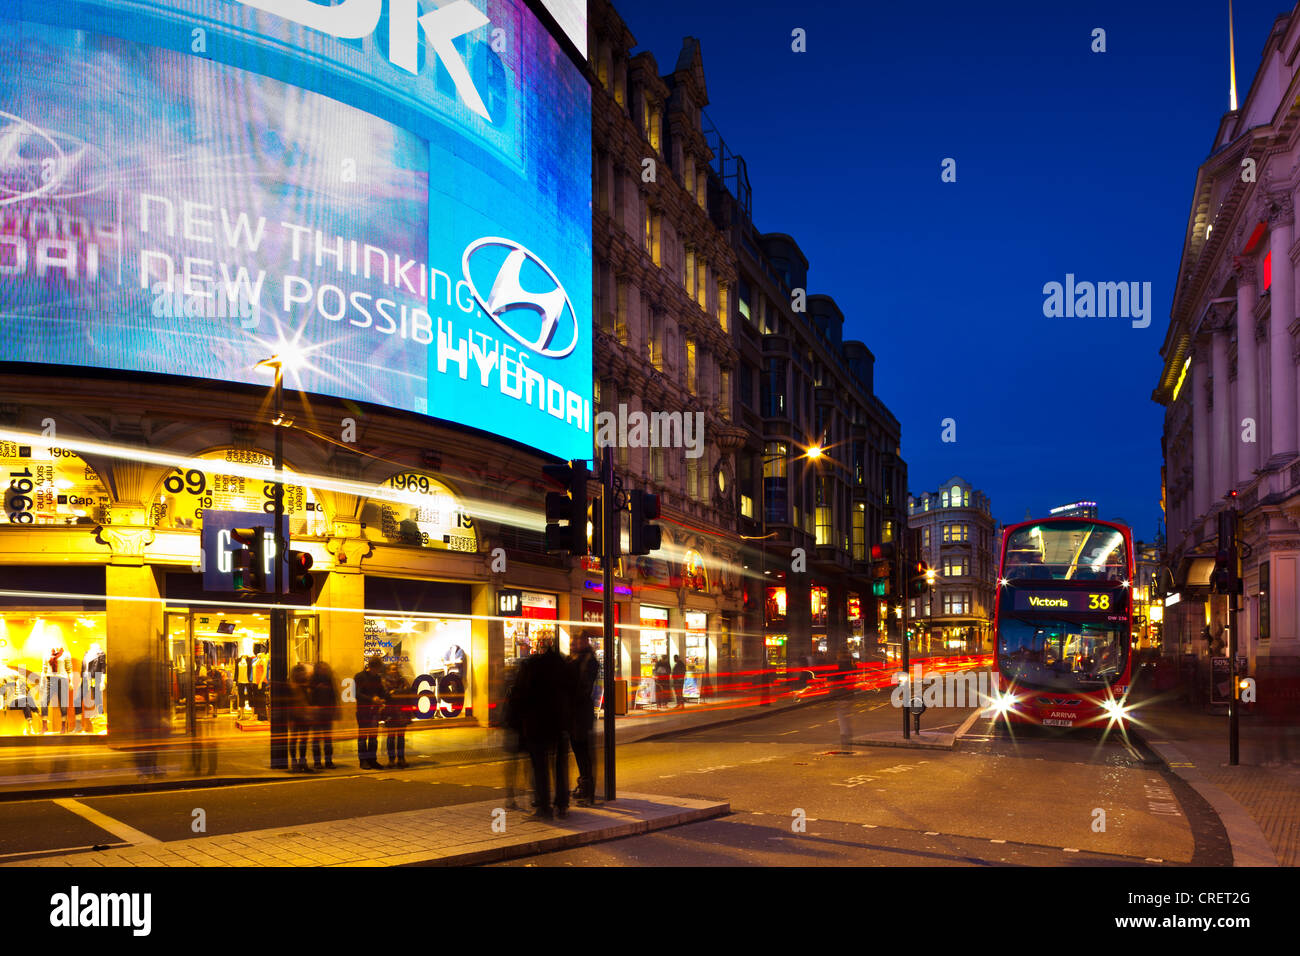 England, London, Piccadilly Circus. Piccadilly Circus located in the London's West End in the City of Westminster Stock Photo